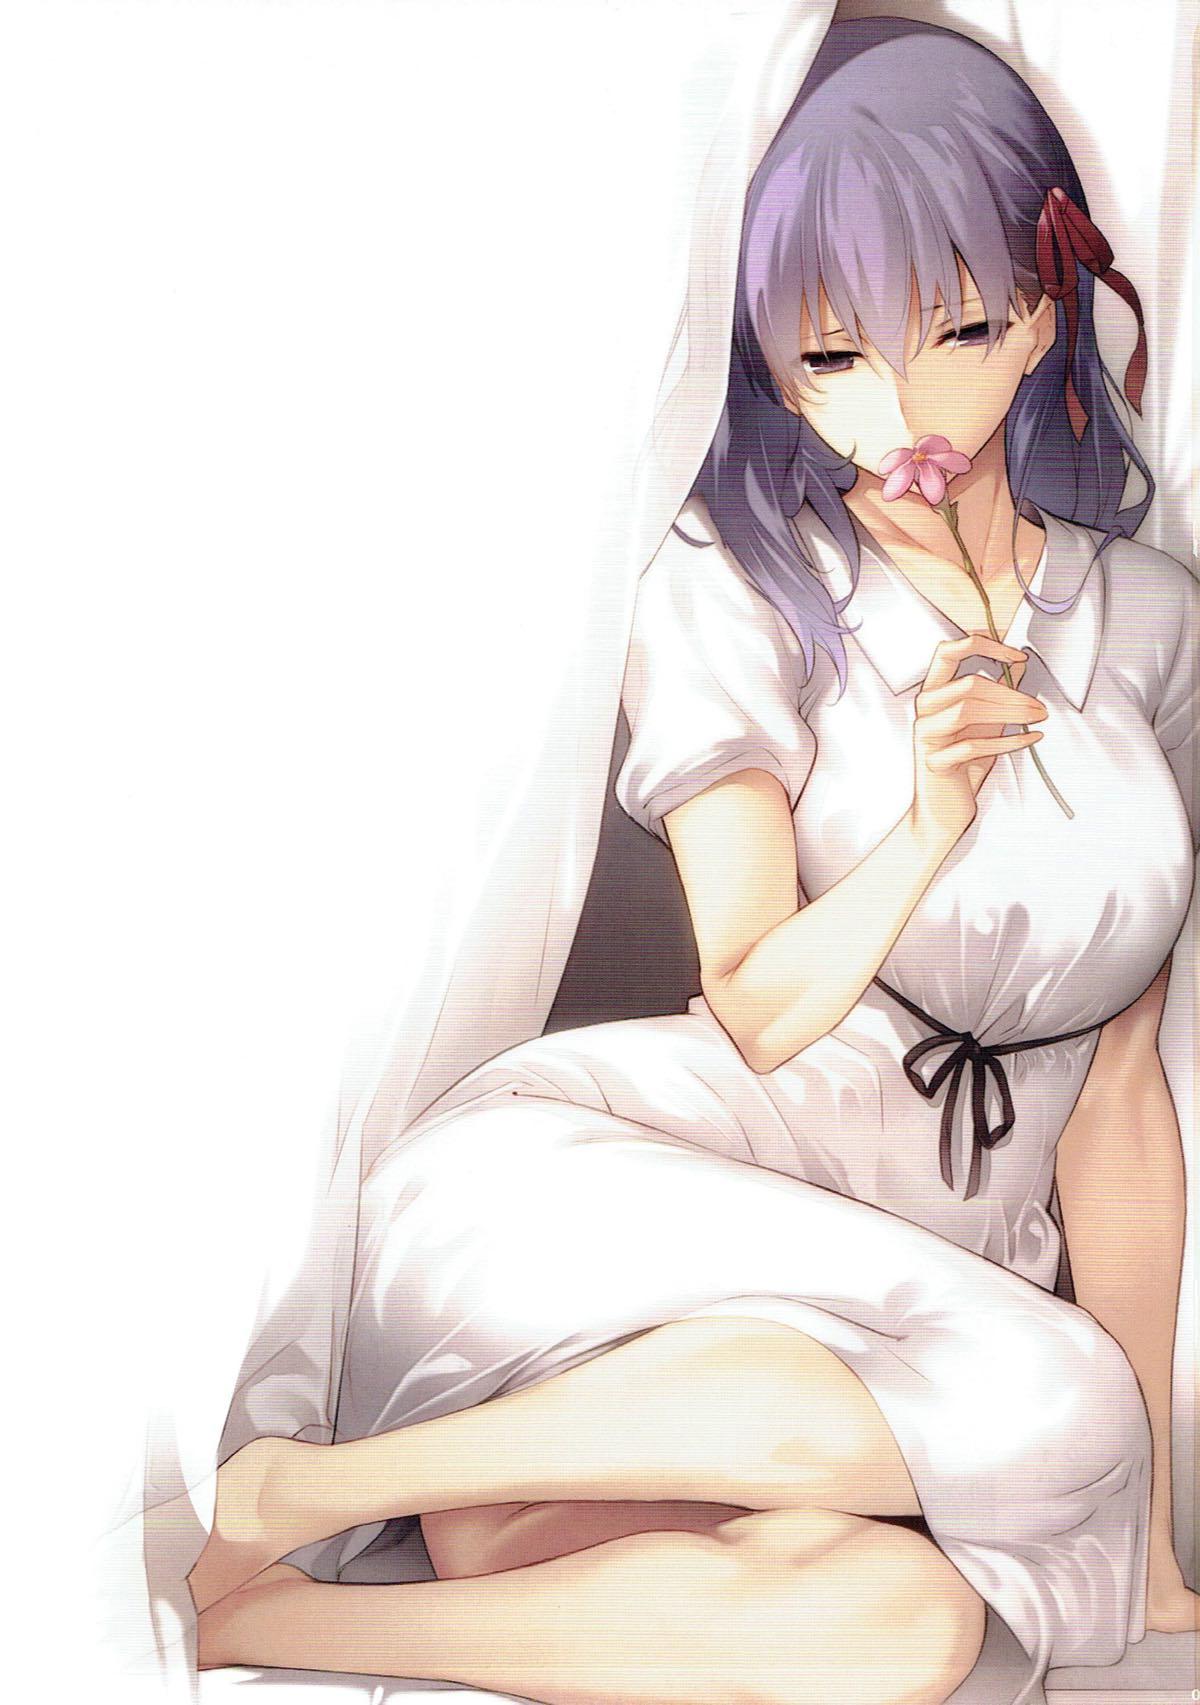 Tgirl THE BOOK OF SAKURA - Fate stay night Chastity - Page 2